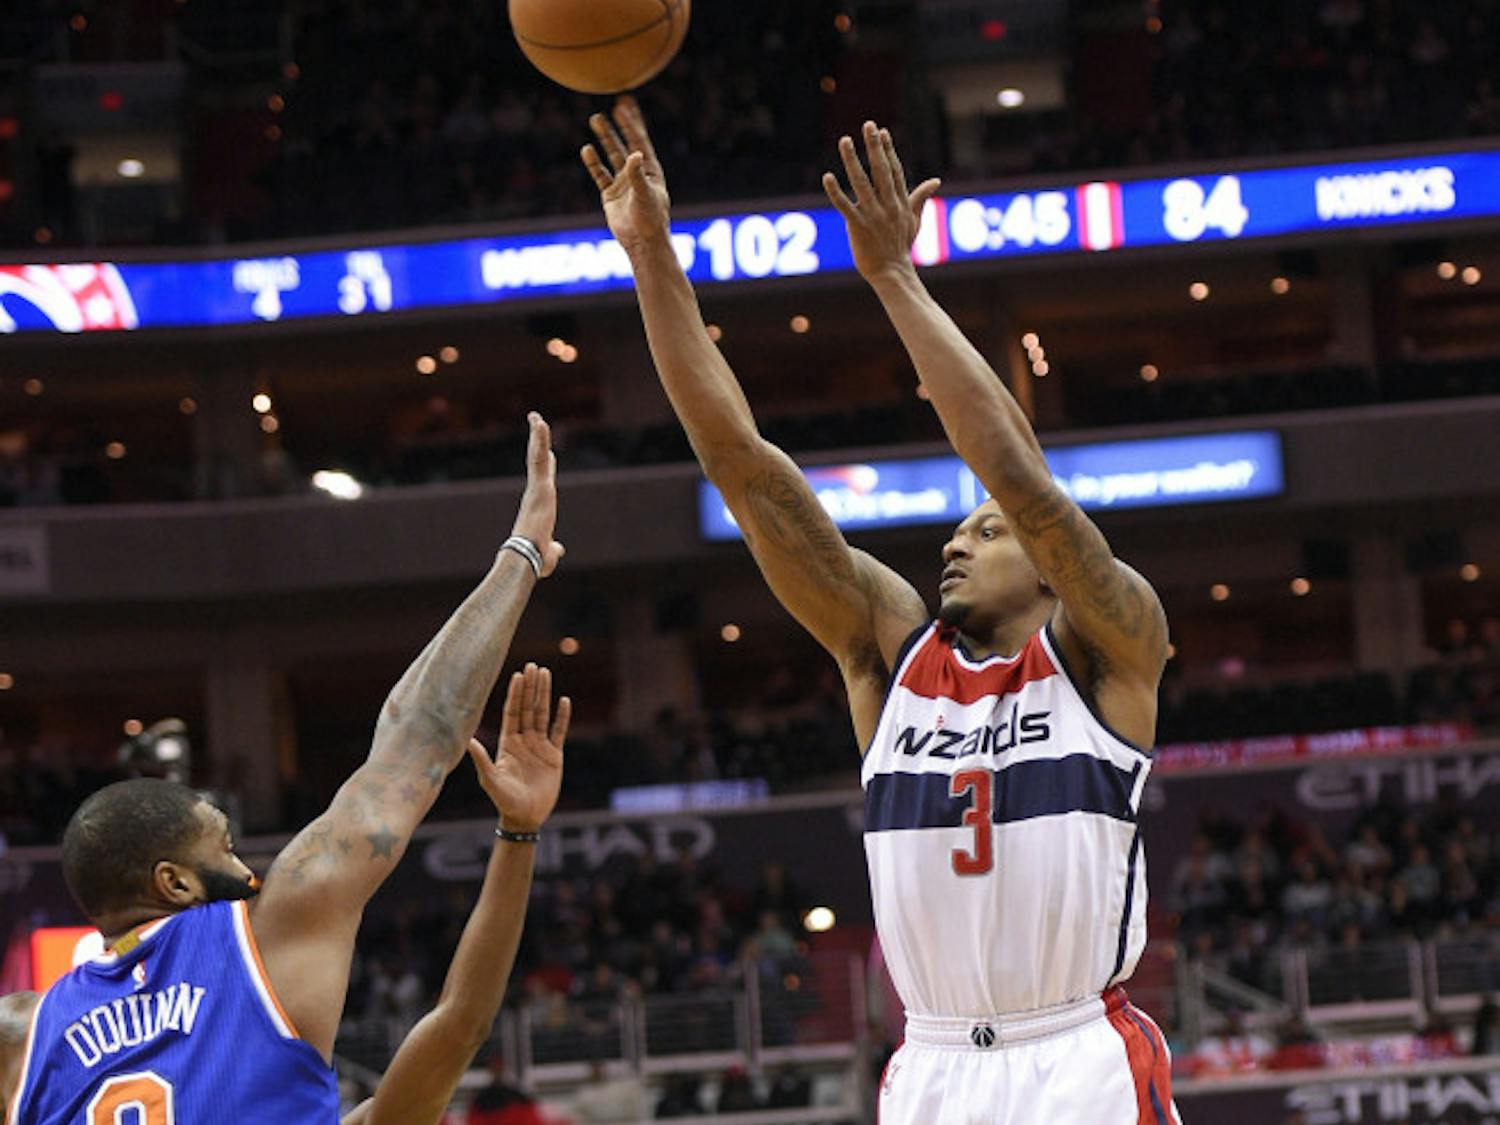 Washington Wizards guard Bradley Beal (3) shoots against New York Knicks center Kyle O'Quinn (9) during the second half of an NBA basketball game, Tuesday, Jan. 31, 2017, in Washington. The Wizards won 117-101. (AP Photo/Nick Wass)